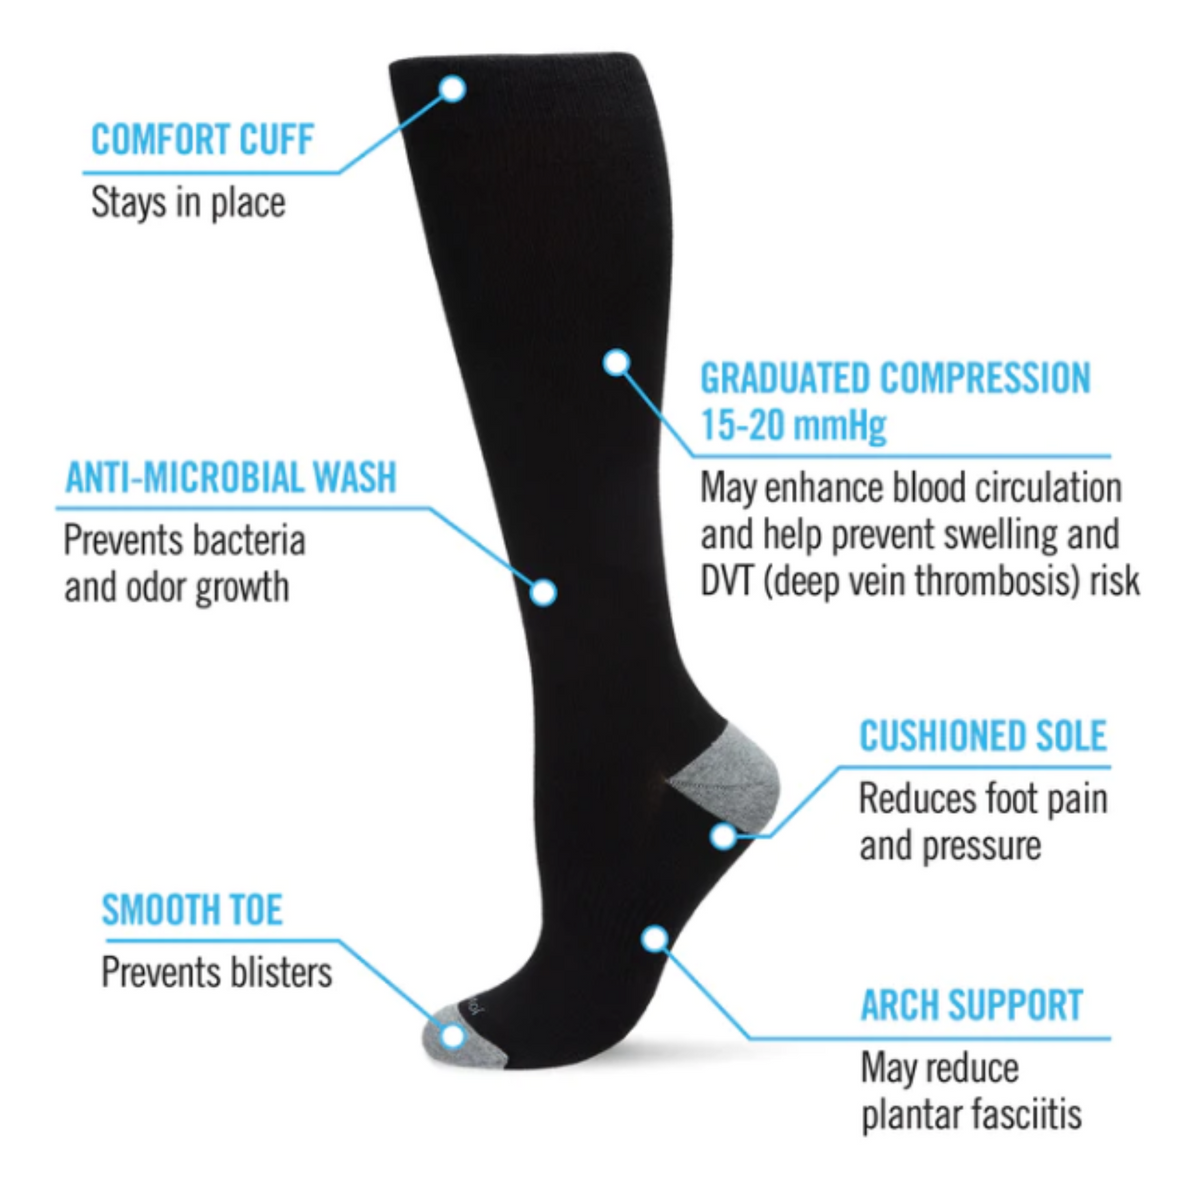 MeMoi Solid Cotton Moderate Graduated Compression (15-20mmHg) women&#39;s sock details in a diagram